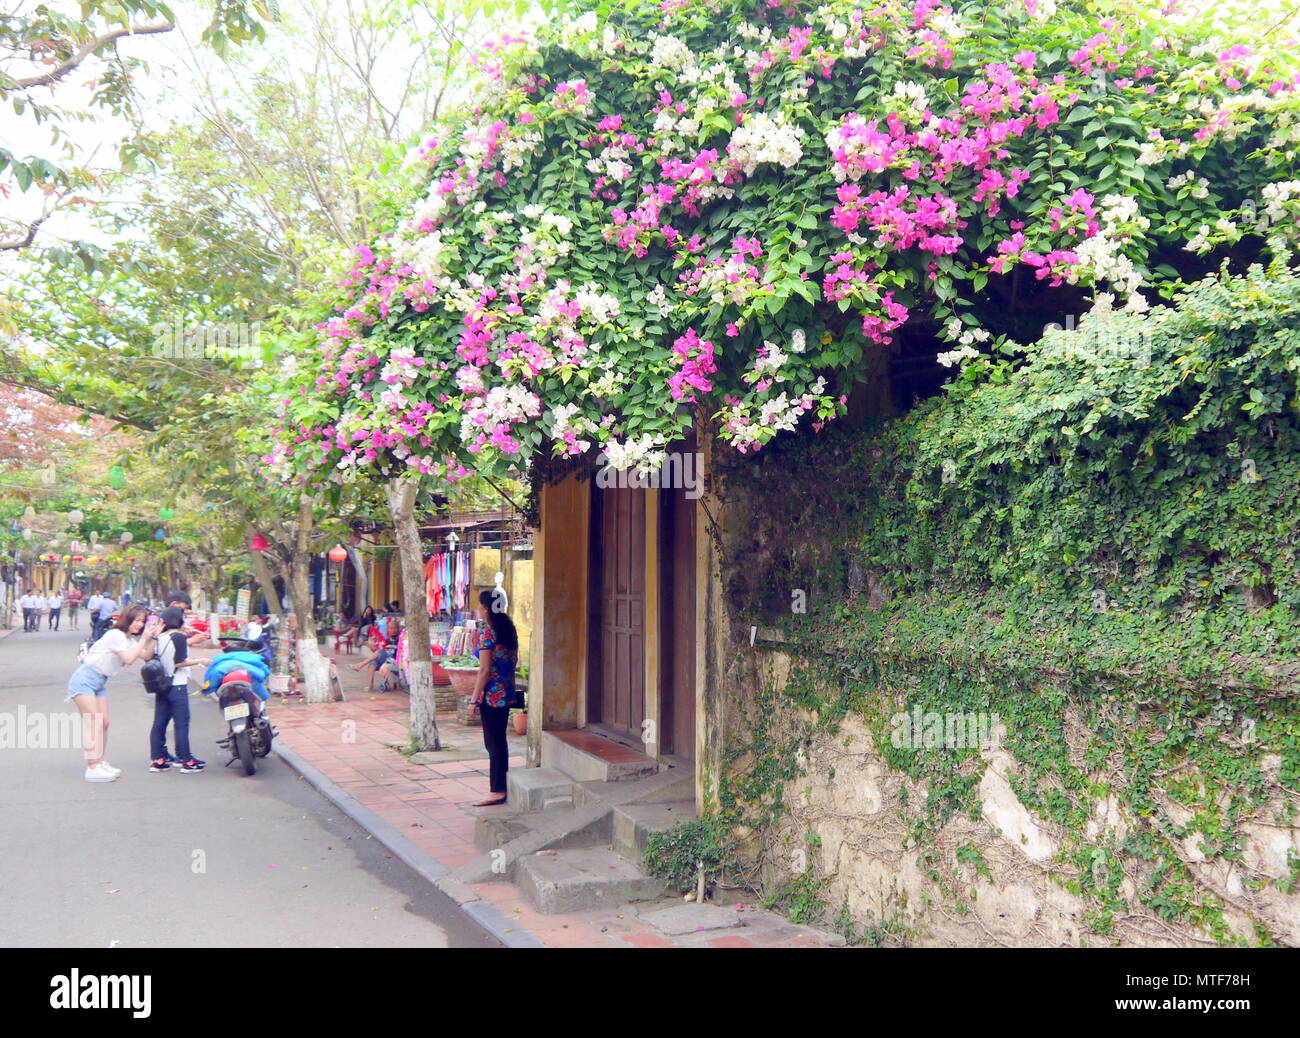 HOI AN, VIETNAM - 17TH MARCH 2018: Tourist posing in front of blooming magenta and white bougainvillea at a house gate in Hoi An Stock Photo